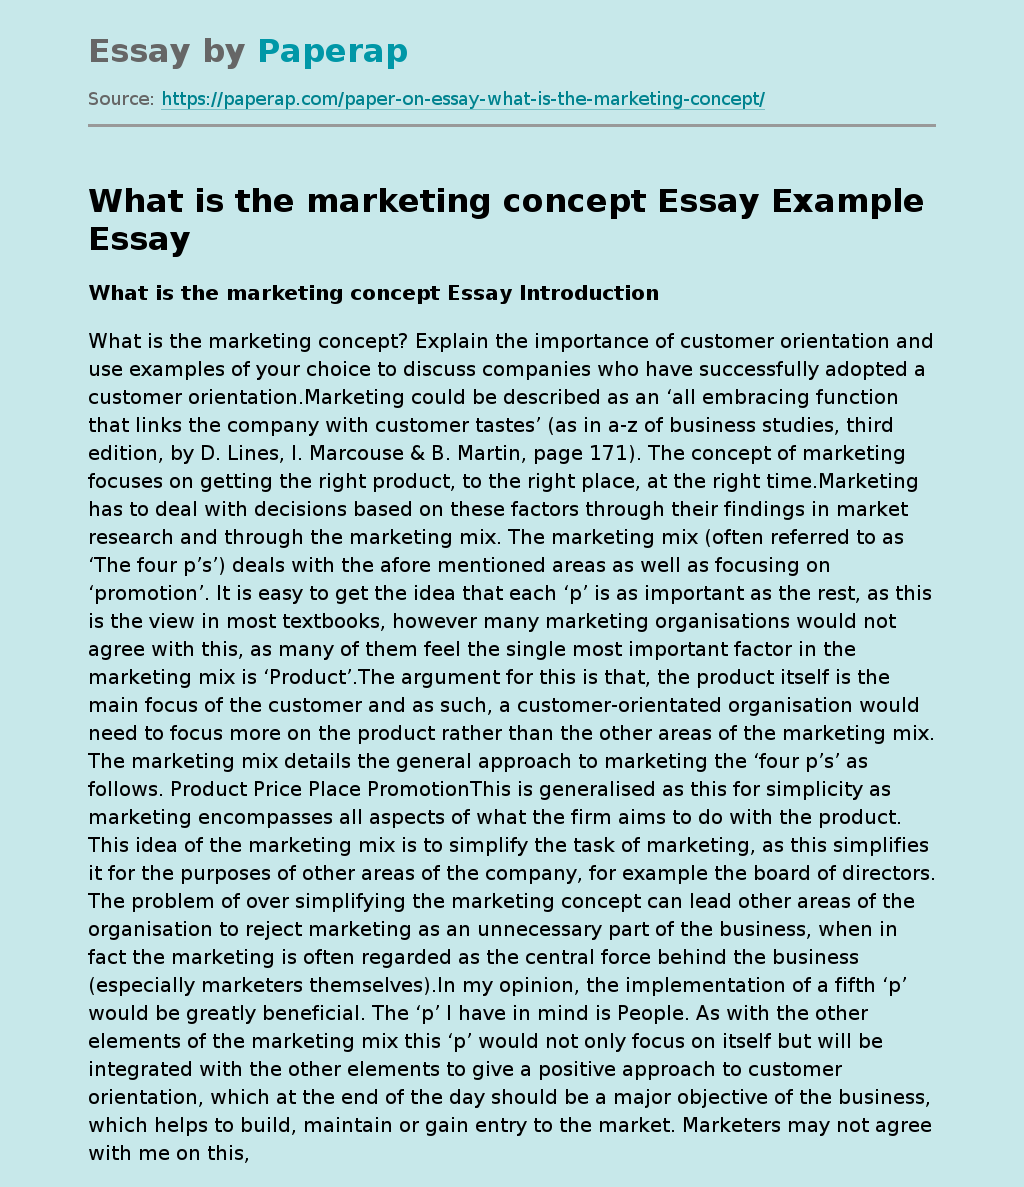 What Is the Marketing Concept?